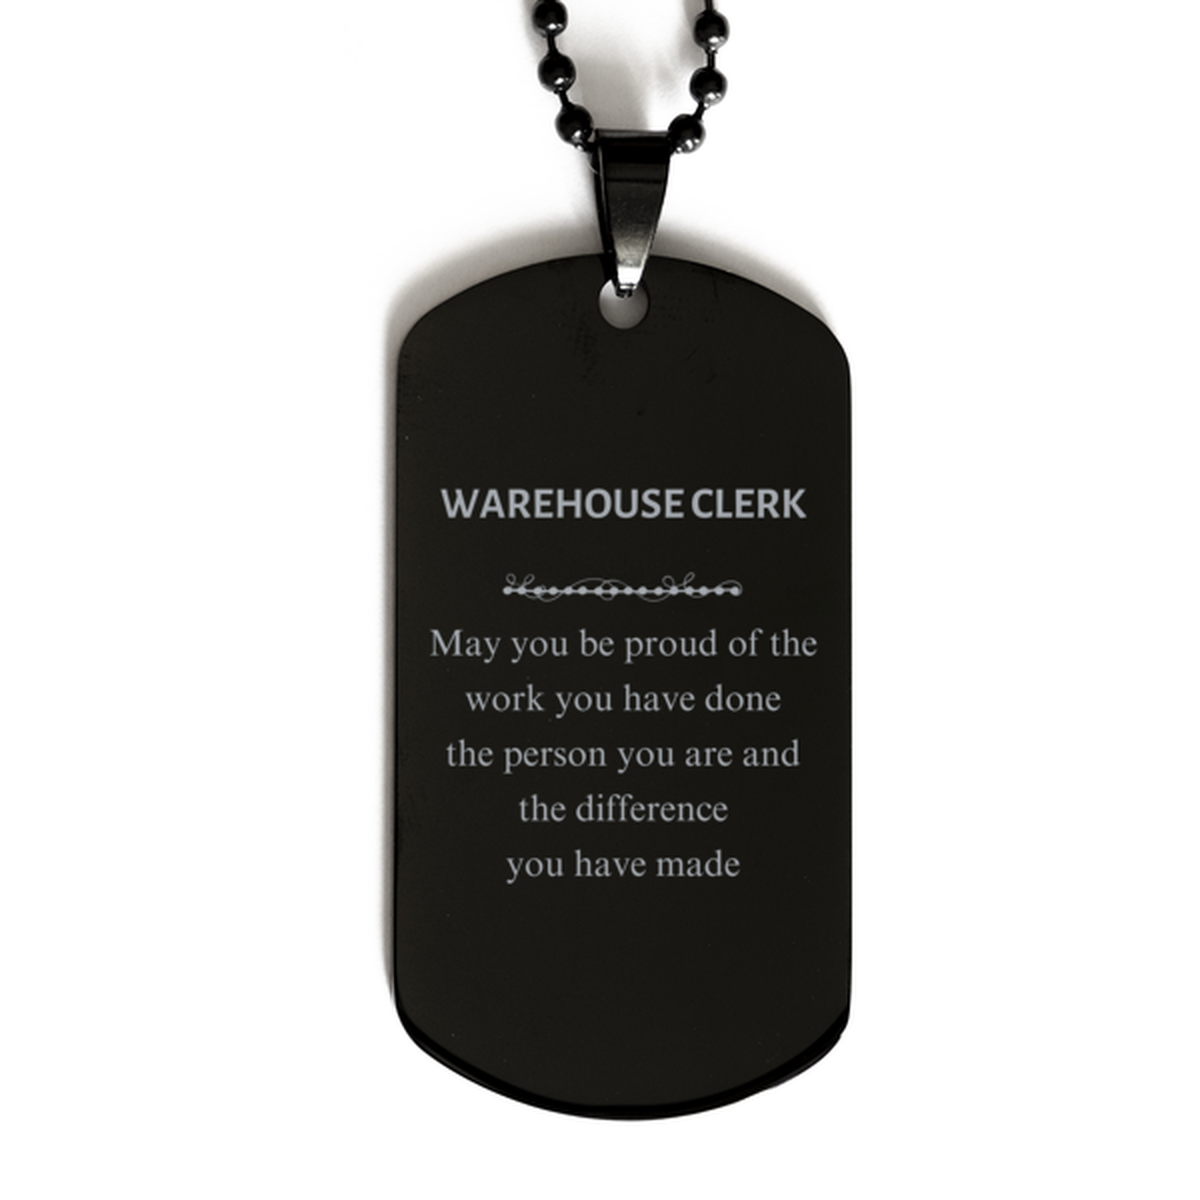 Warehouse Clerk May you be proud of the work you have done, Retirement Warehouse Clerk Black Dog Tag for Colleague Appreciation Gifts Amazing for Warehouse Clerk